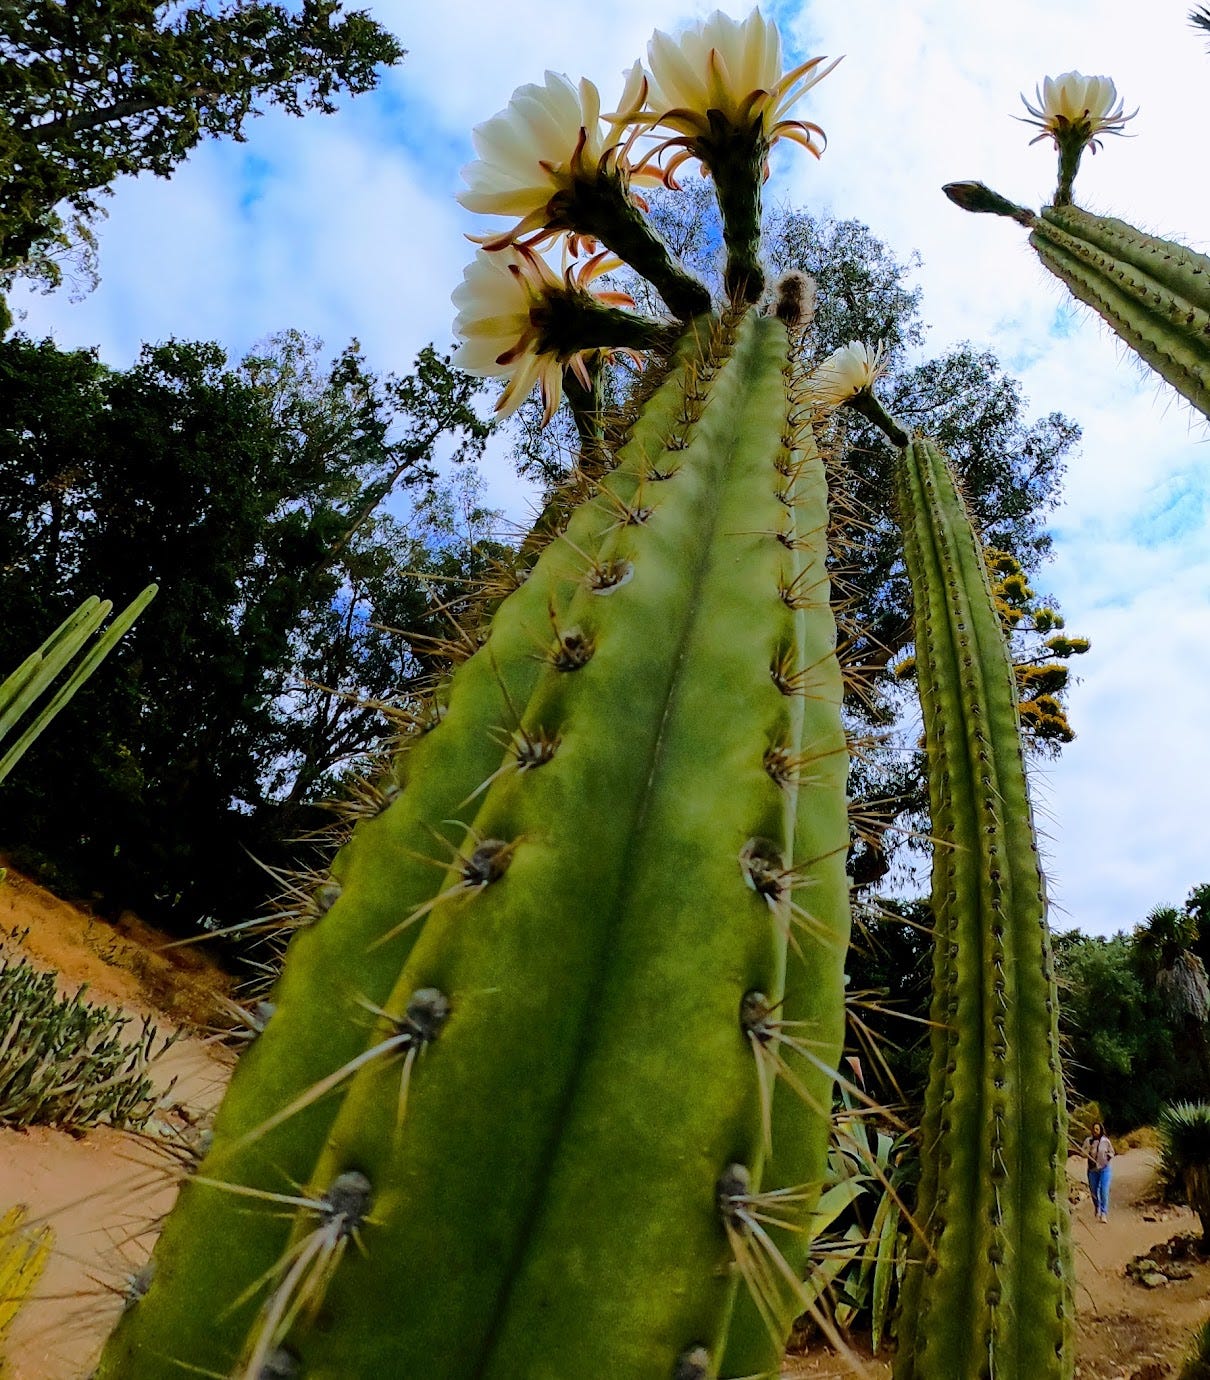 Can You Drink Water from a Cactus?